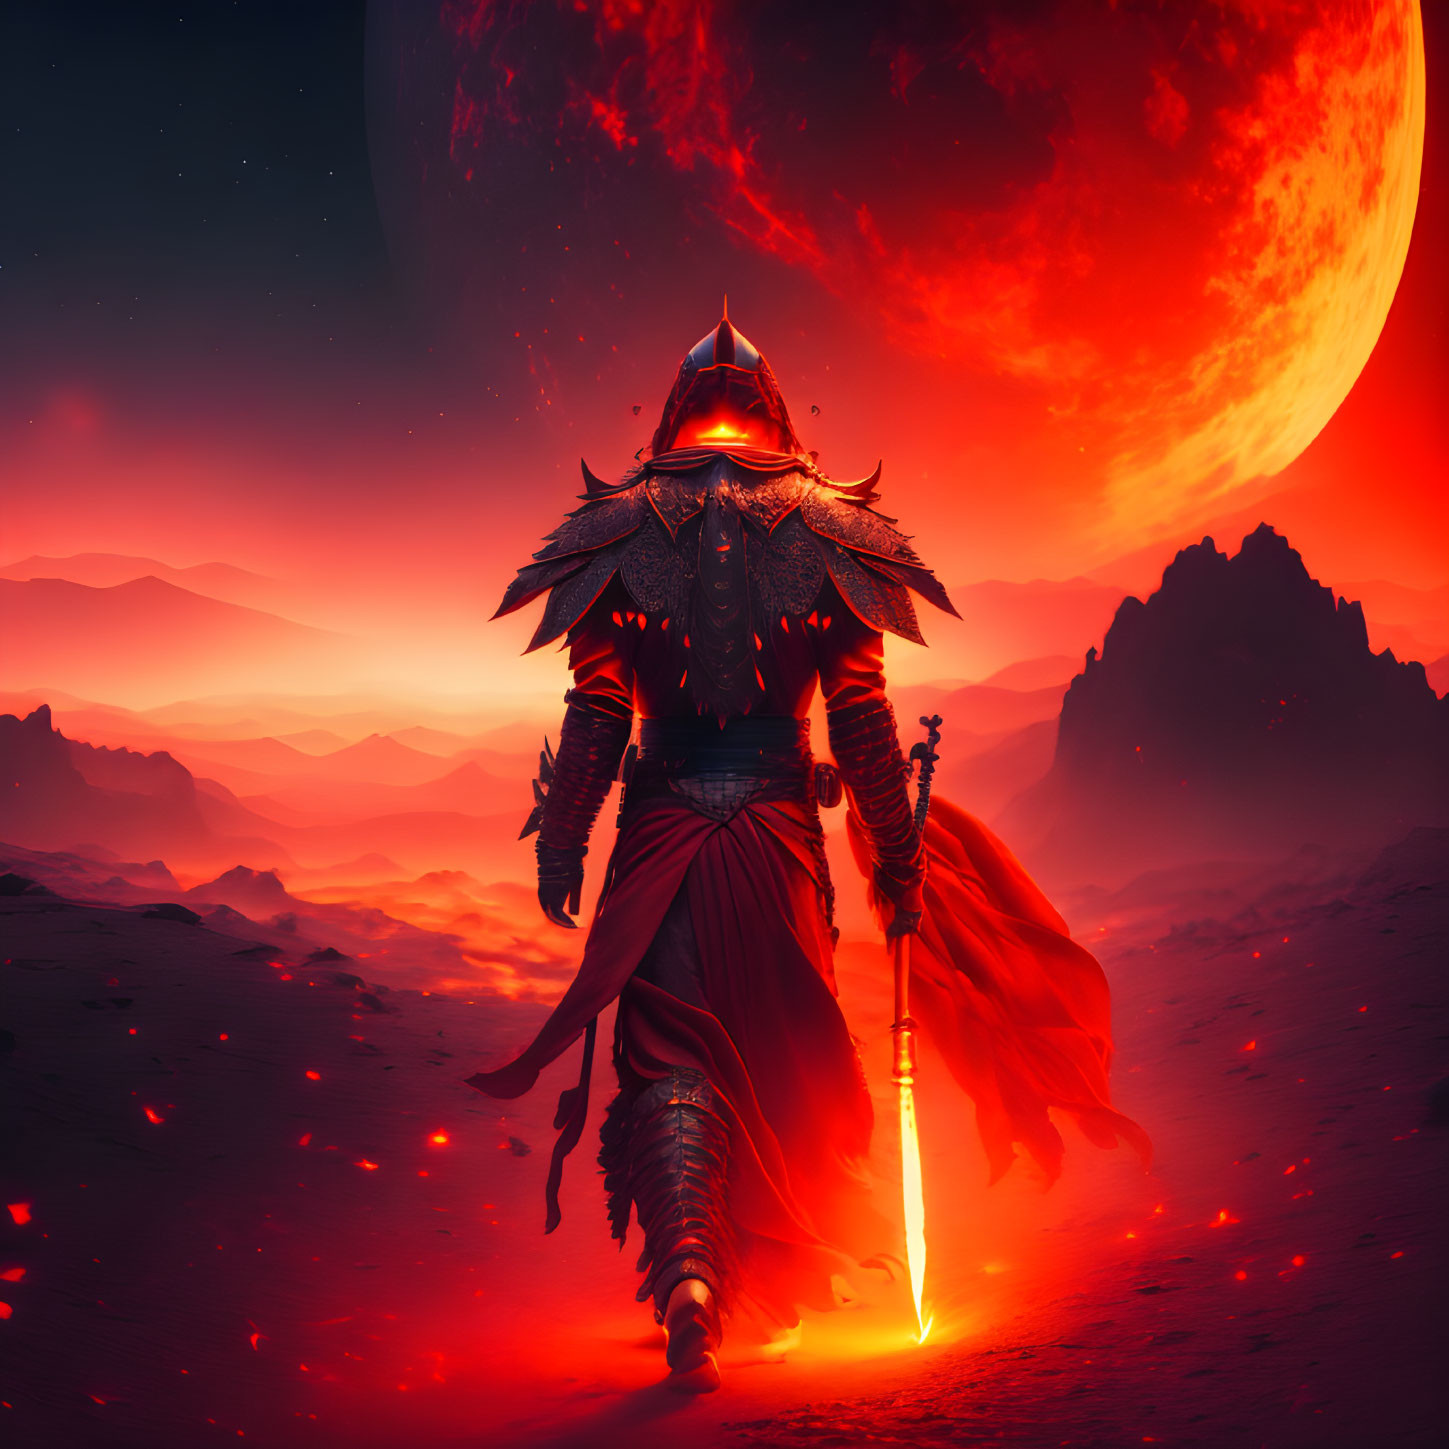 Ornate armored warrior with glowing sword on red alien landscape